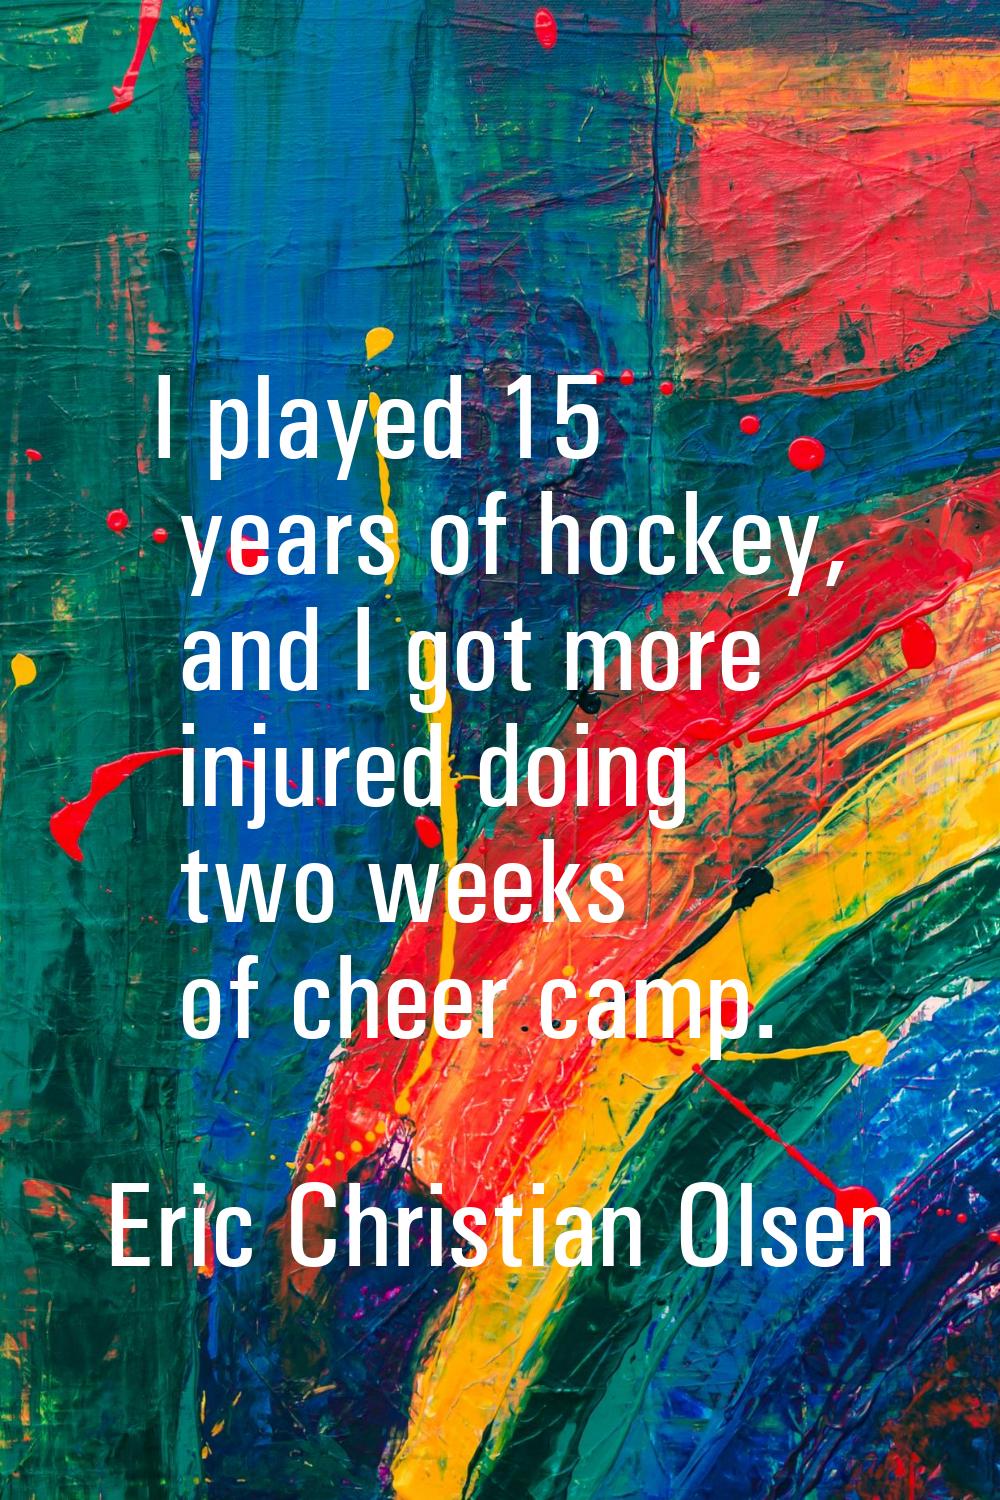 I played 15 years of hockey, and I got more injured doing two weeks of cheer camp.